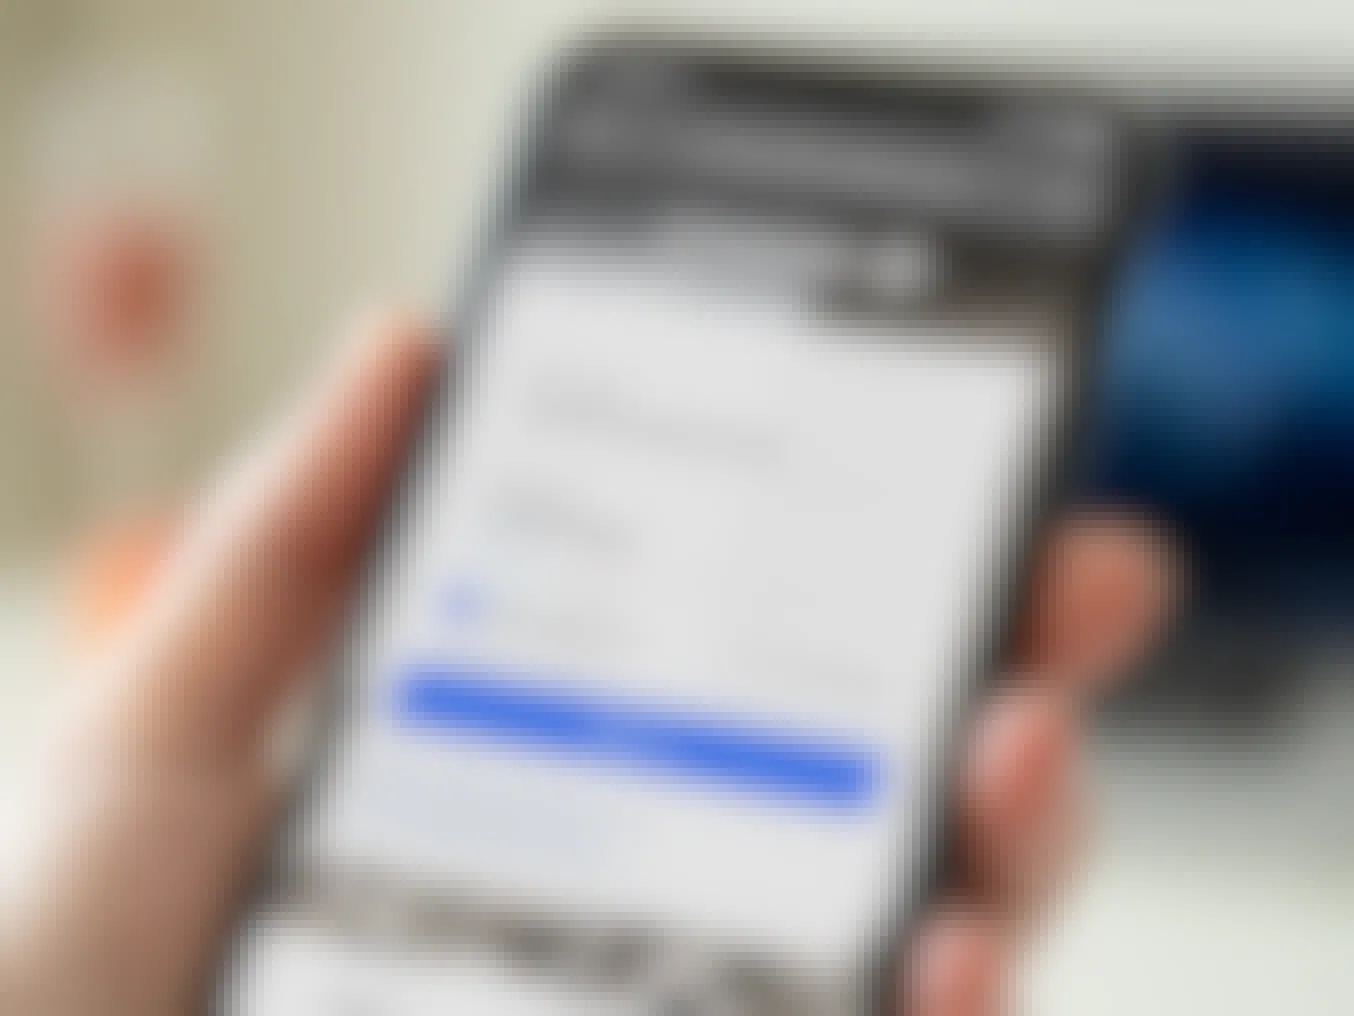 A close-up of someone holding an iPhone displaying the Chase Bank online banking log in screen with the username typed in as "DeadPresidentsClub